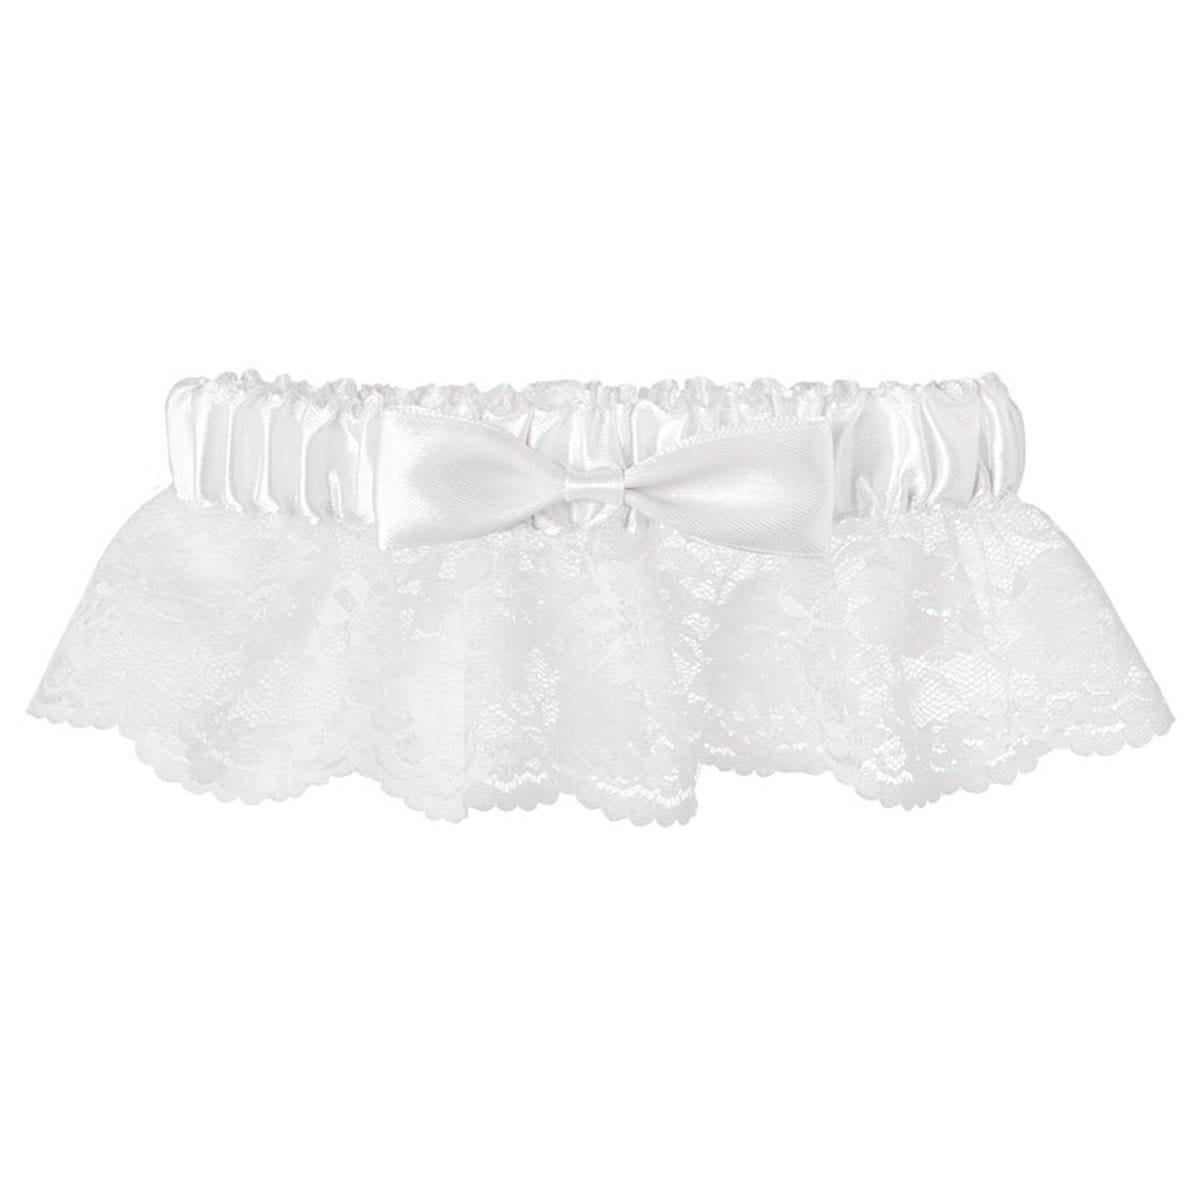 Buy Wedding Lace Garter With White Ribbon - One Size sold at Party Expert